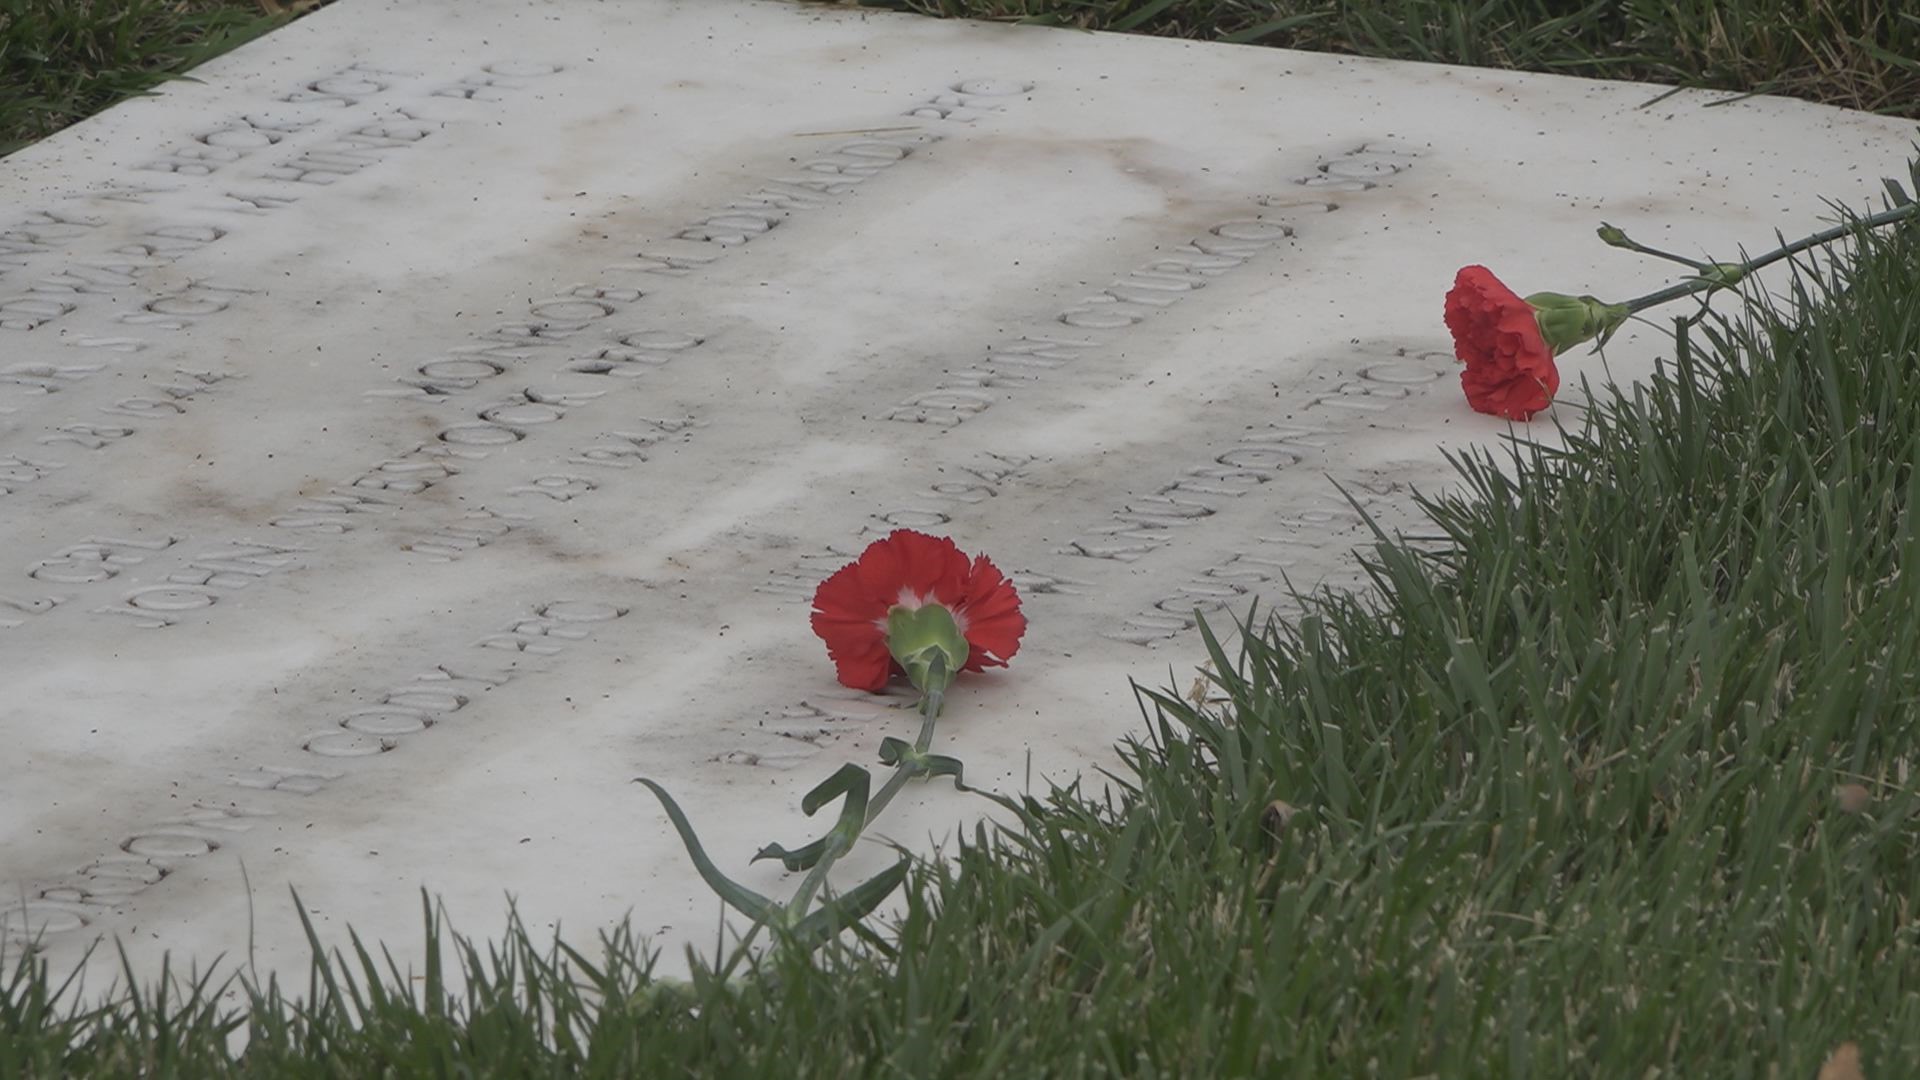 The volunteers laid more than 3,000 flowers and flags at grave sites of World War II veterans.